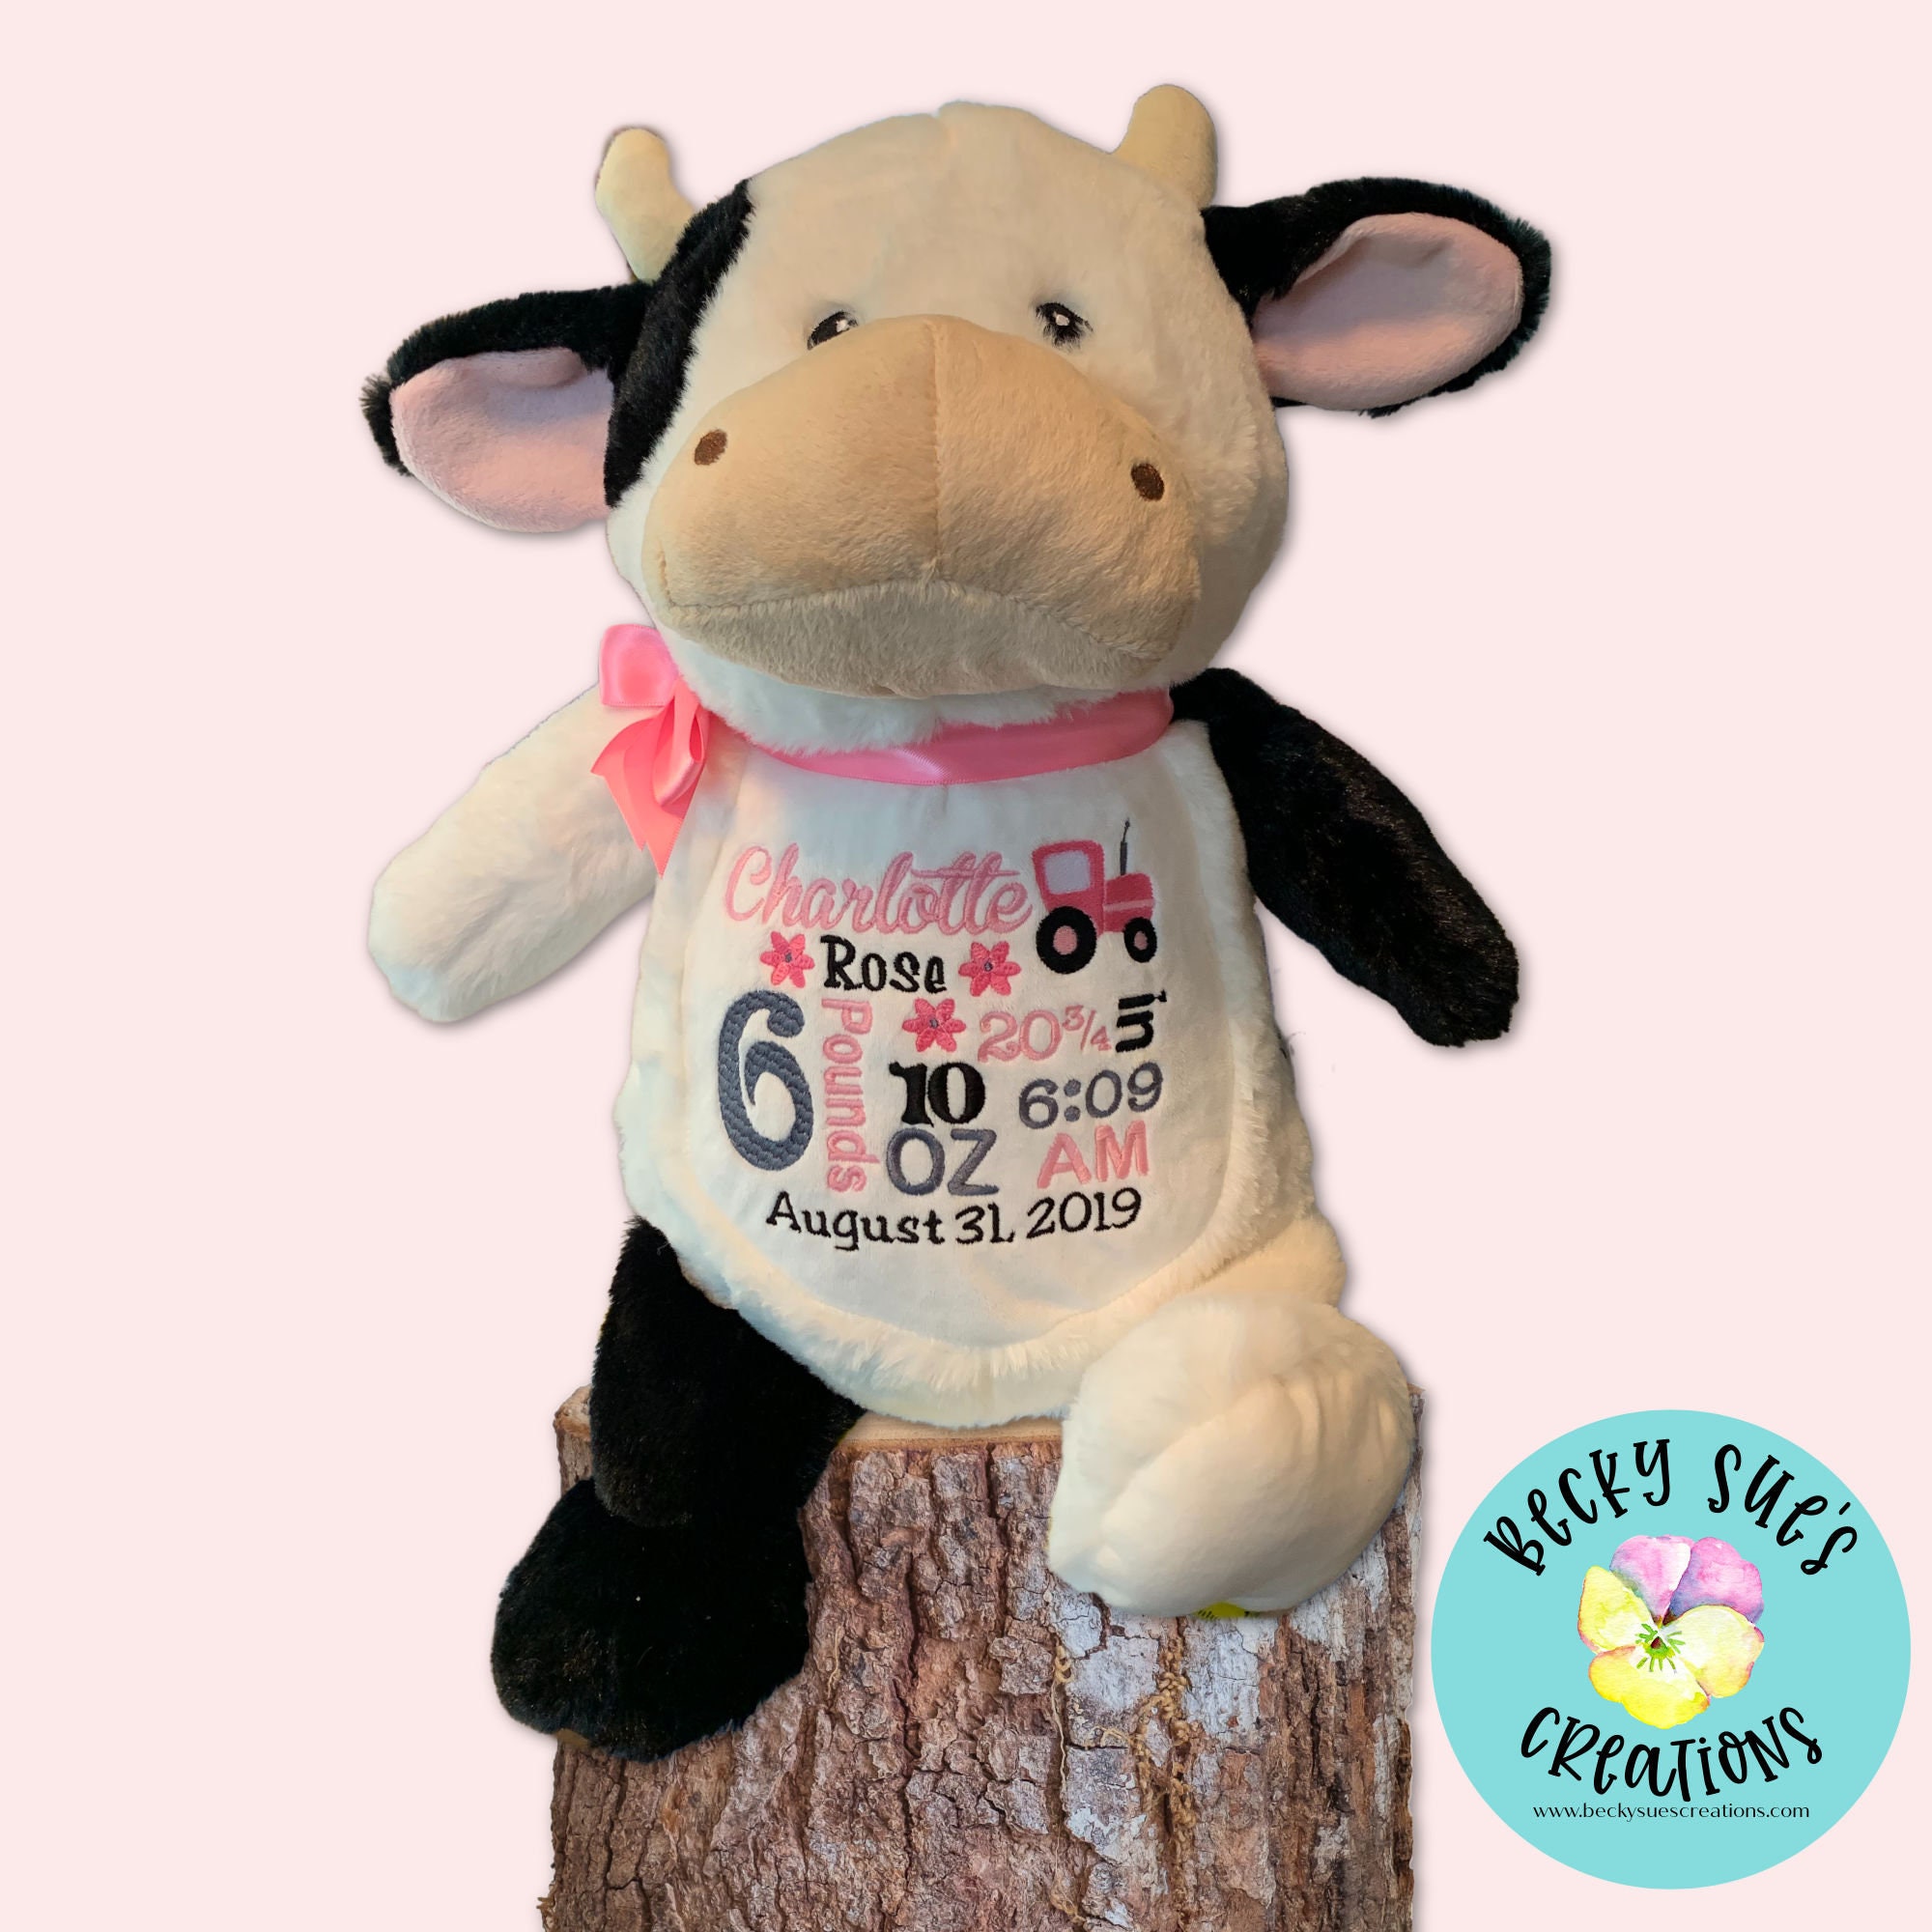 Personalized stuffed animal cow embroidered birth announcement stuffed animal handmade embroidered farm baby shower gift idea